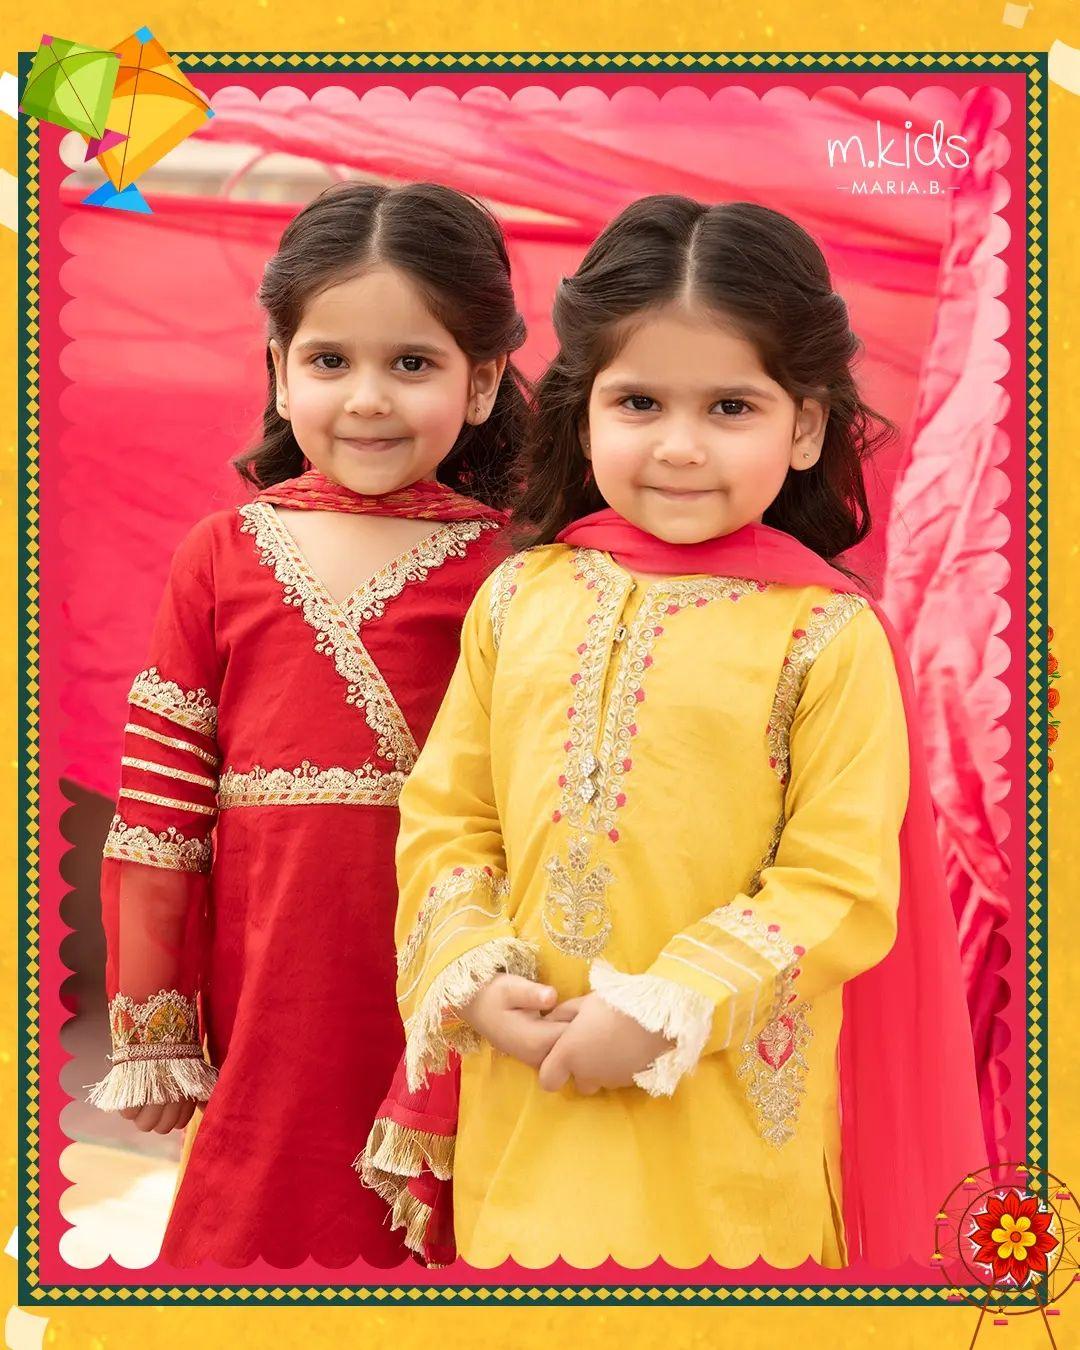 Bursting with vibrant shades of yellow and red, the new Maria.B. Kids collection promises carefree sun-drenched days ahead with Jashn-e-Baharan Ready-To-Wear Collection’22 !!

Red Product Code: MKD-EF22-16
Yellow Product Code: MKD-EF22-05

Available Now In-Stores &amp; Online at https://www.mariab.pk/kids/kids.html

#MariaB #Mkids #ReadyToWear #MKidsSS22 #SpringSummer2022
*Follow our dedicated page for constant updates @mariabkids